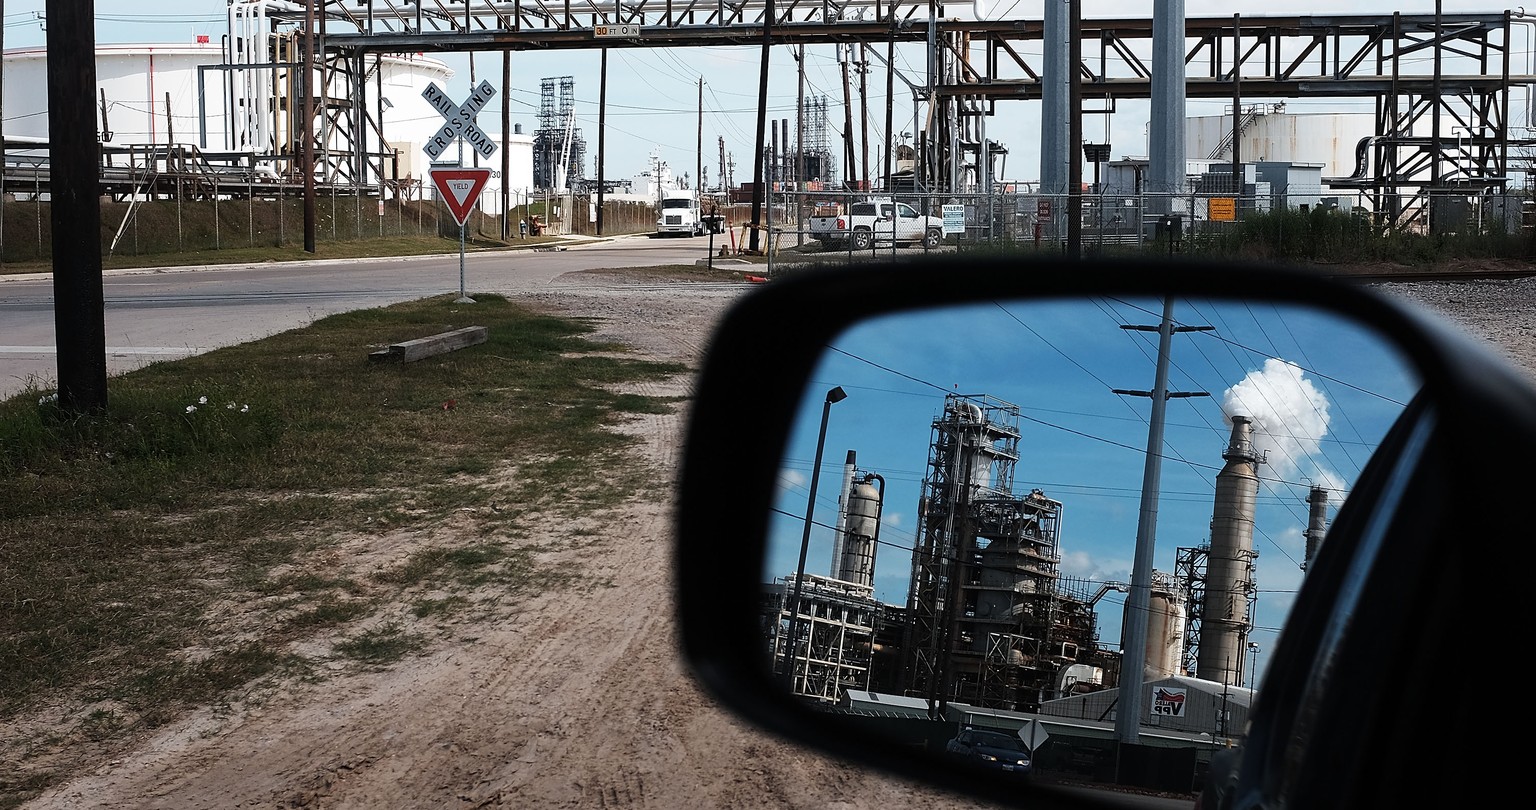 HOUSTON, TX - MARCH 25: An oil refinery is shown on March 25, 2015 in Houston, Texas. Texas, which in just the last five years has tripled its oil production and delivered hundreds of billions of doll ...